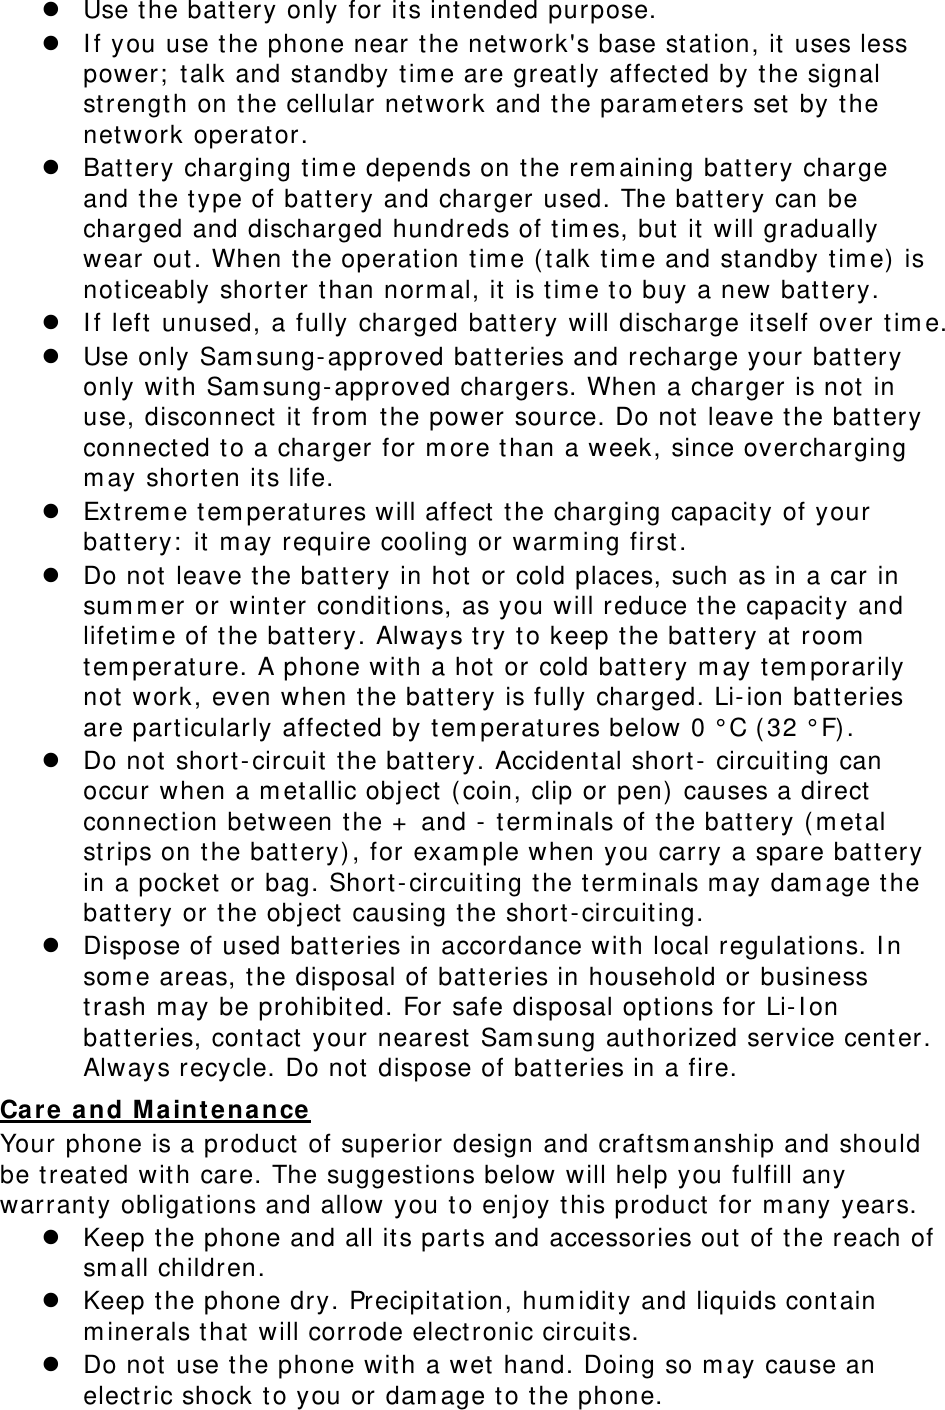 z Use the batt ery only for its intended purpose. z I f you use the phone near t he network&apos;s base st ation, it  uses less power;  t alk and standby t im e are great ly affect ed by t he signal strengt h on t he cellular network and the param eters set  by the network operator. z Battery charging t im e depends on t he rem aining battery charge and the type of battery and charger used. The bat t ery can be charged and discharged hundreds of t im es, but  it  will gradually wear out. When t he operation tim e ( talk tim e and st andby t im e) is noticeably shorter t han norm al, it is tim e t o buy a new batt ery. z I f left unused, a fully charged batt ery will discharge itself over tim e. z  Use only Sam sung- approved batteries and recharge your battery only with Sam sung- approved chargers. When a charger is not in use, disconnect  it from  the power source. Do not  leave t he bat t ery connect ed to a charger for m ore than a week, since overcharging m ay short en its life. z Ext rem e t em peratures will affect  t he charging capacity of your batt ery:  it m ay require cooling or warm ing first. z Do not leave t he batt ery in hot or cold places, such as in a car in sum m er or wint er conditions, as you will reduce the capacit y and lifet im e of t he battery. Always t ry t o keep t he batt ery at  room  tem perature. A phone with a hot or cold bat t ery m ay t em porarily not work, even when t he battery is fully charged. Li-ion batt eries are particularly affect ed by tem perat ures below 0 ° C ( 32 ° F) . z Do not short - circuit  t he batt ery. Accidental short -  circuiting can occur when a m et allic object (coin, clip or pen)  causes a direct  connect ion between t he +  and -  t erm inals of t he bat t ery ( m etal strips on the batt ery), for exam ple when you carry a spare battery in a pocket or bag. Short-circuiting the term inals m ay dam age t he batt ery or t he object causing the short -circuit ing. z Dispose of used bat t eries in accordance with local regulat ions. I n som e areas, t he disposal of bat t eries in household or business trash m ay be prohibited. For safe disposal options for Li-I on batt eries, cont act  your nearest  Sam sung authorized service cent er. Always recycle. Do not dispose of batt eries in a fire. Care and M a int enance Your phone is a product of superior design and craft sm anship and should be treated wit h care. The suggest ions below will help you fulfill any warranty obligations and allow you t o enj oy t his product  for m any years. z Keep the phone and all its parts and accessories out  of t he reach of sm all children. z Keep the phone dry. Precipitat ion, hum idity and liquids contain m inerals t hat will corrode elect ronic circuits. z Do not use the phone with a wet hand. Doing so m ay cause an elect ric shock t o you or dam age to the phone. 